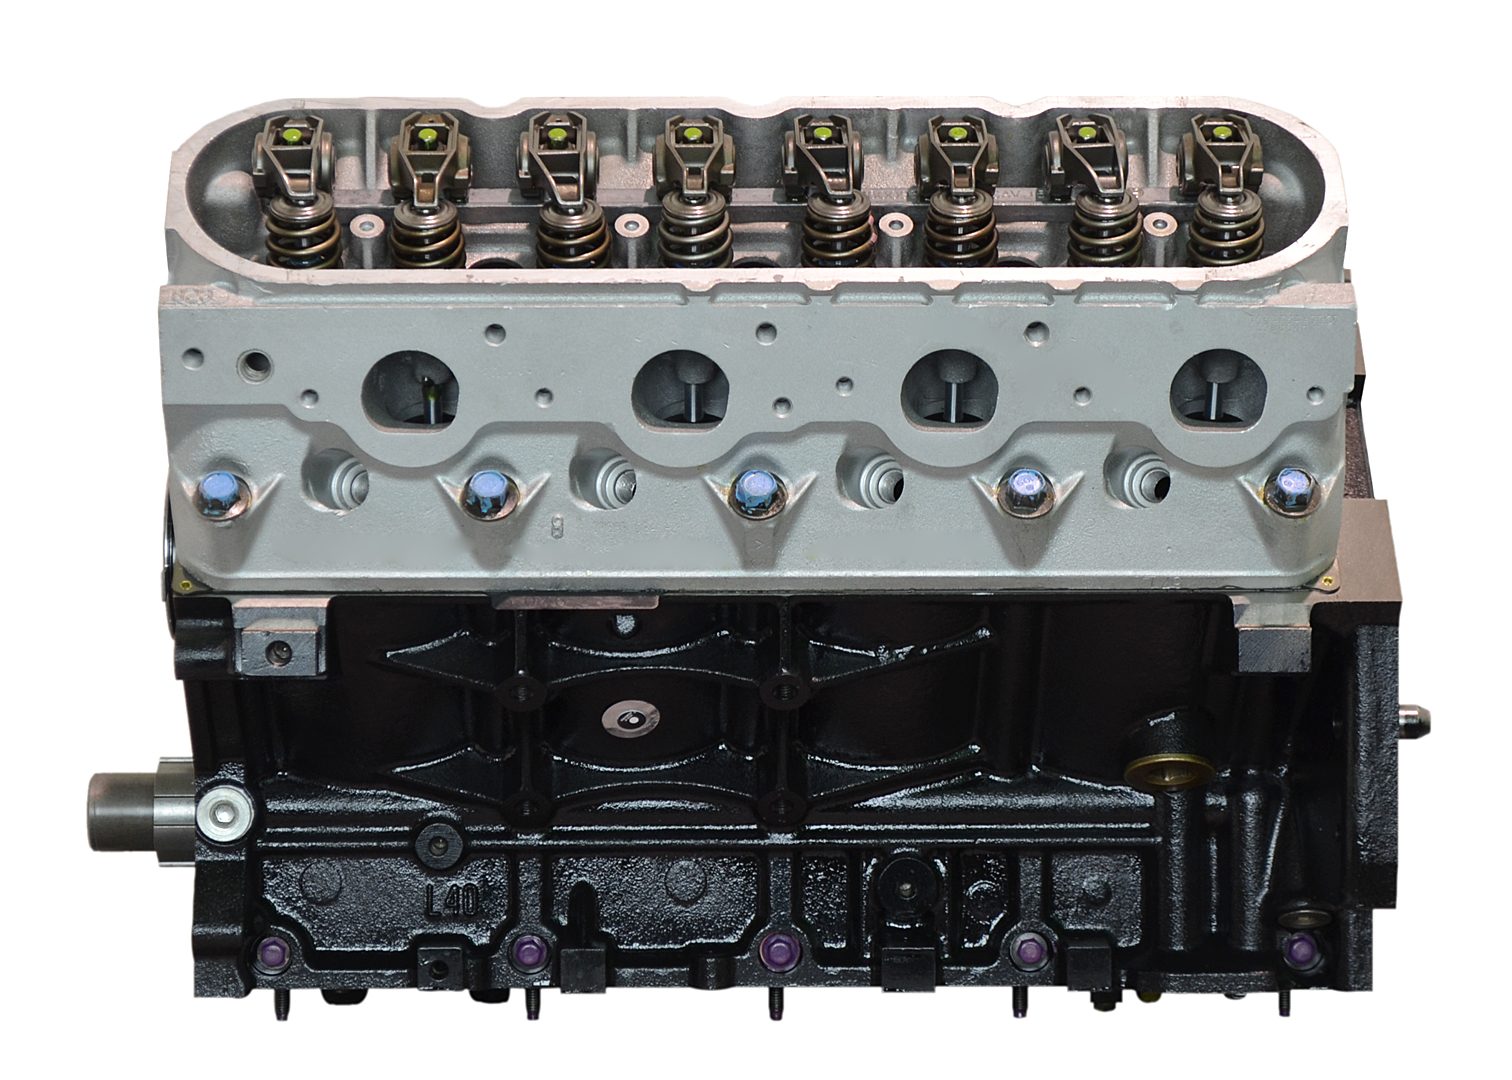 Chevy 6.0L LY6 V8 Remanufactured Engine - 2007-2009